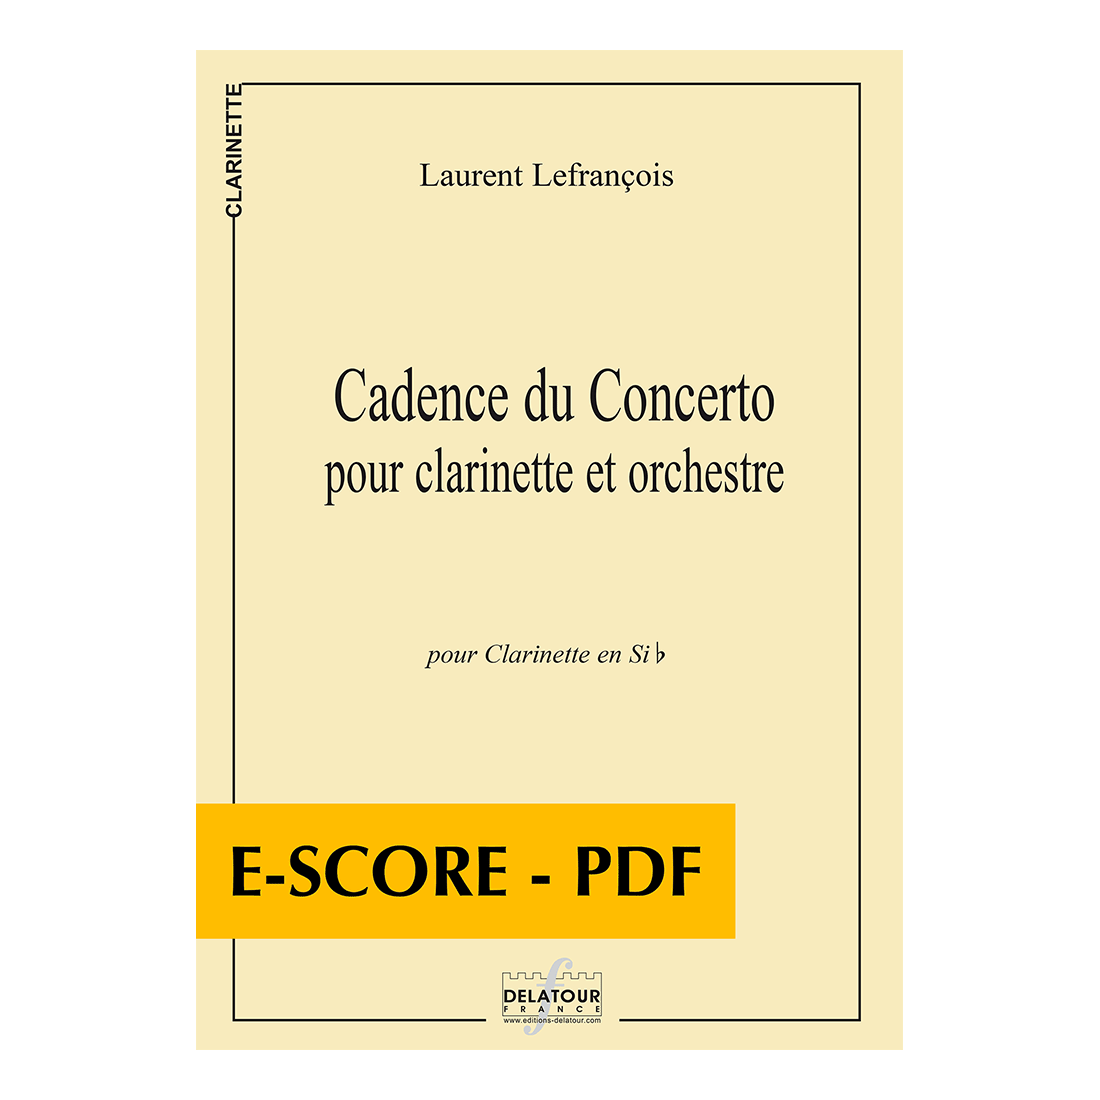  Cadence of the concerto for clarinet and orchestra - E-score PDF